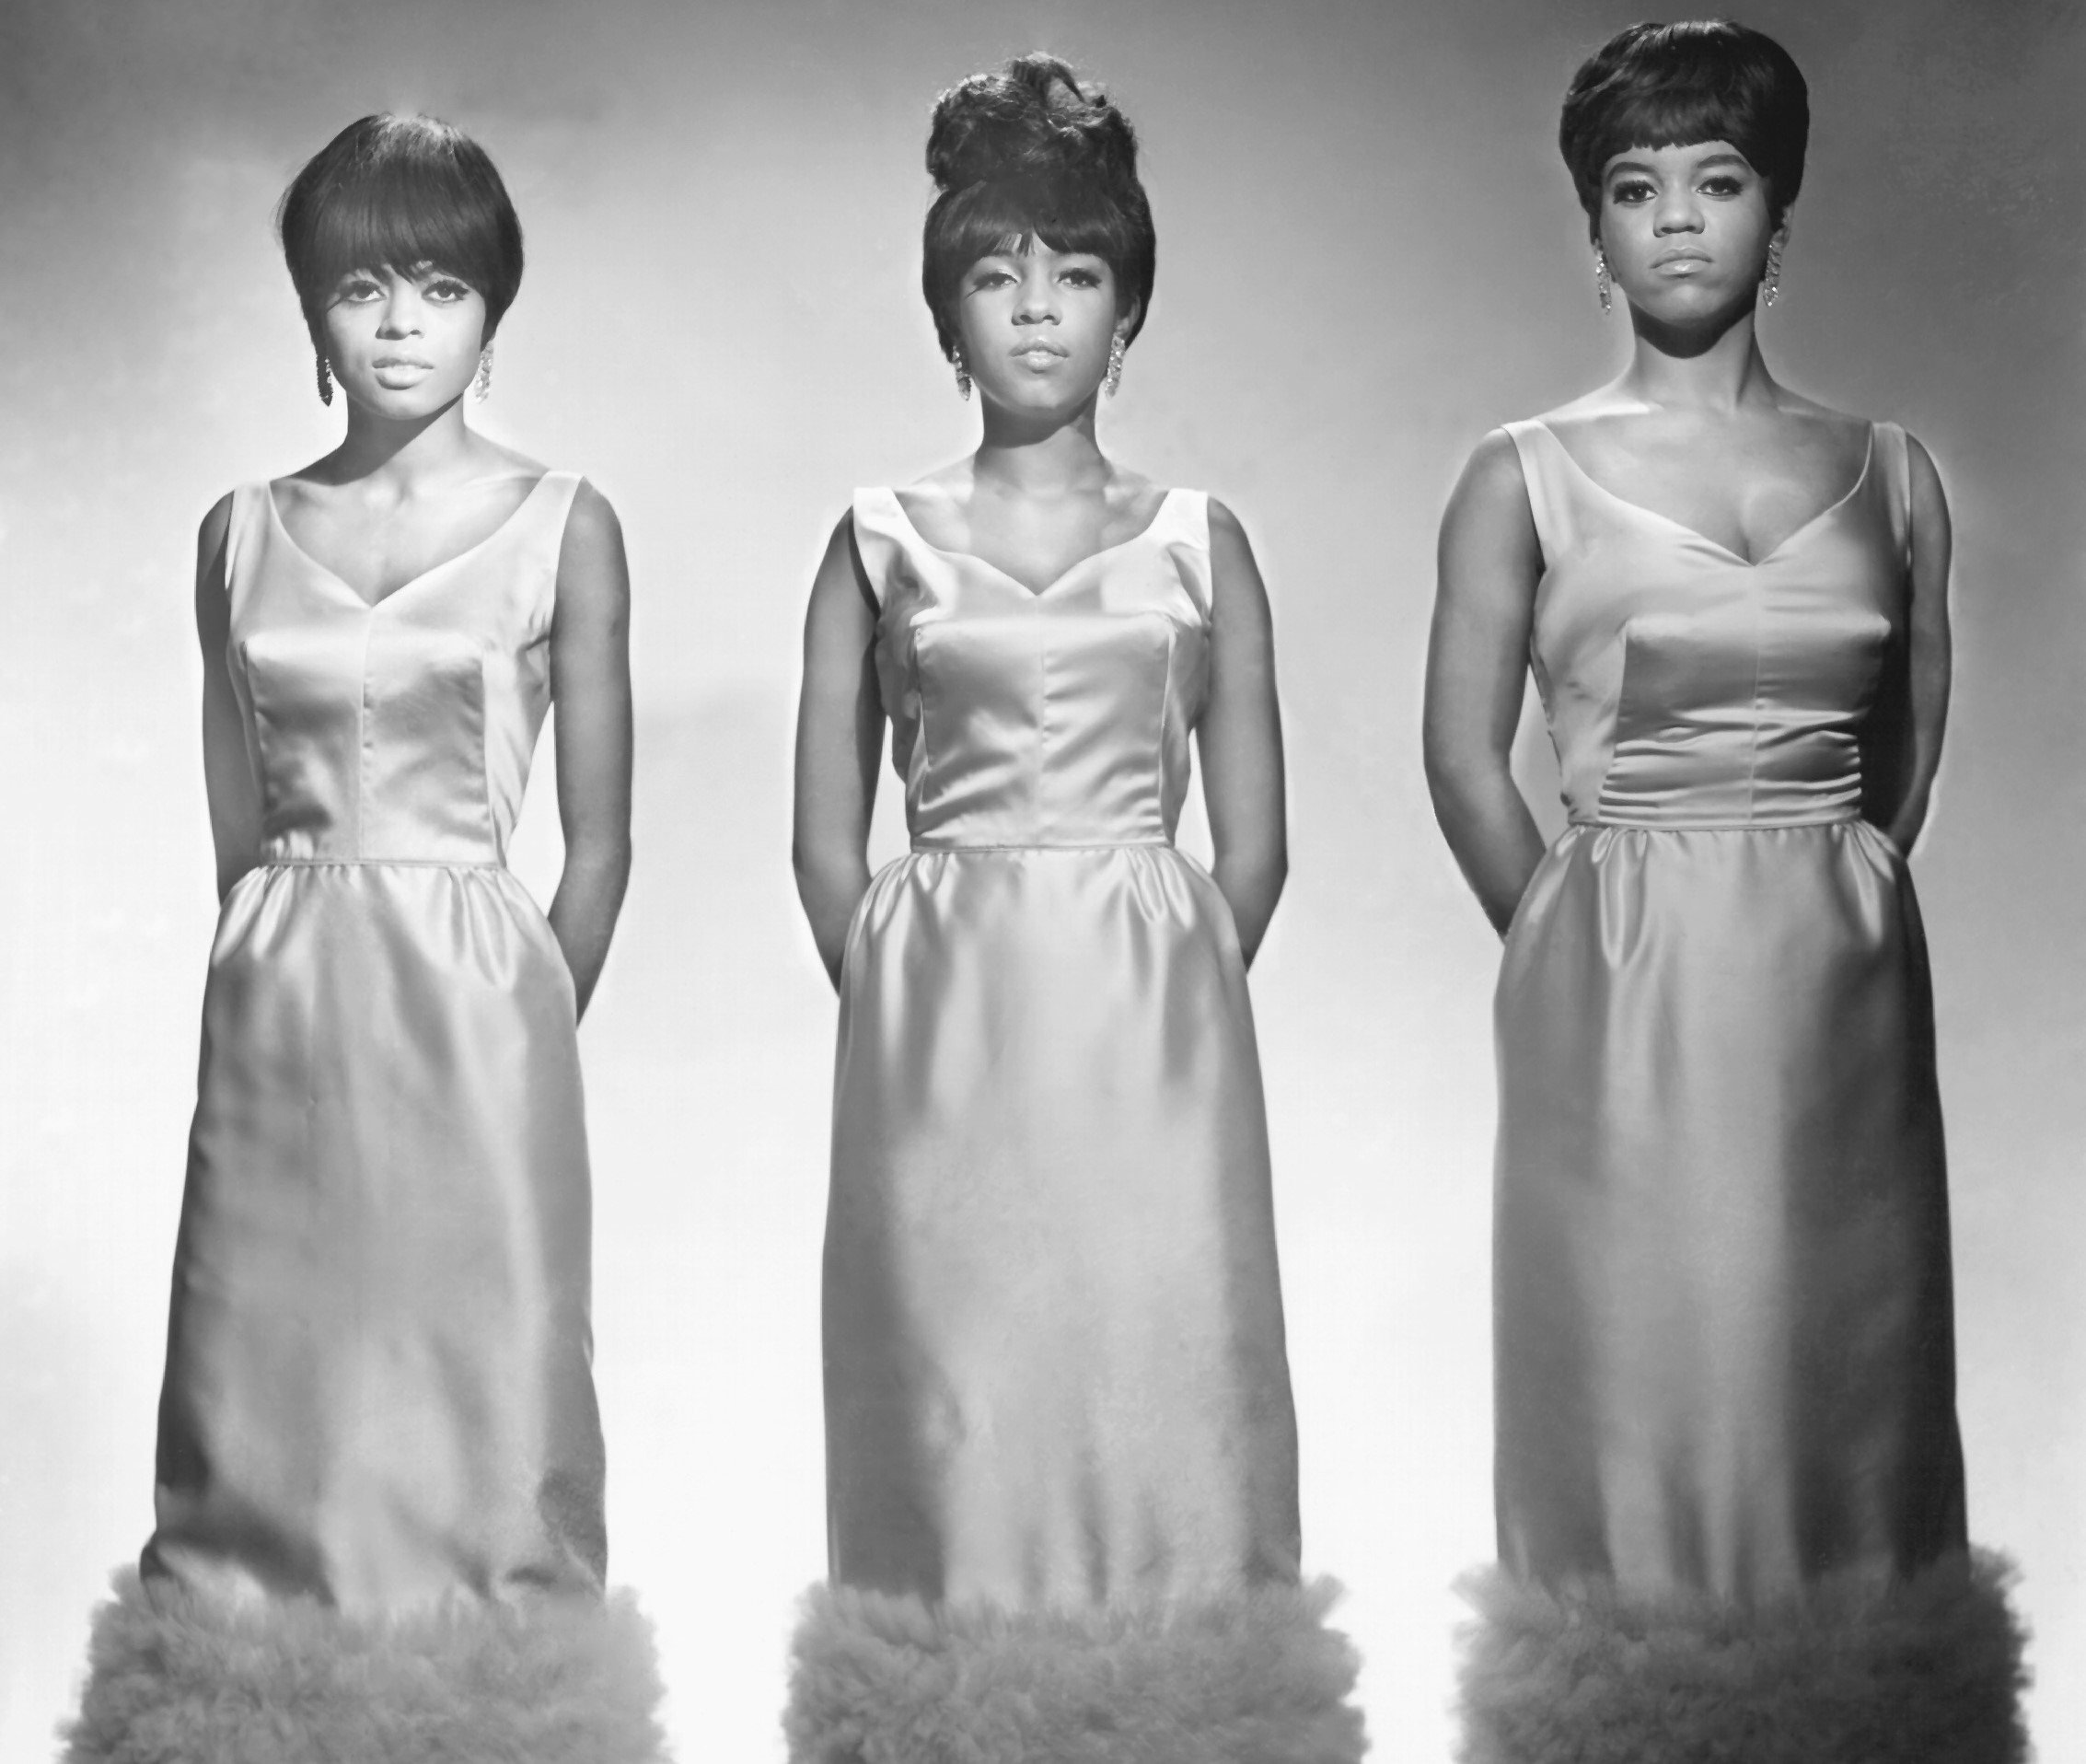 Motown stars The Supremes in dresses